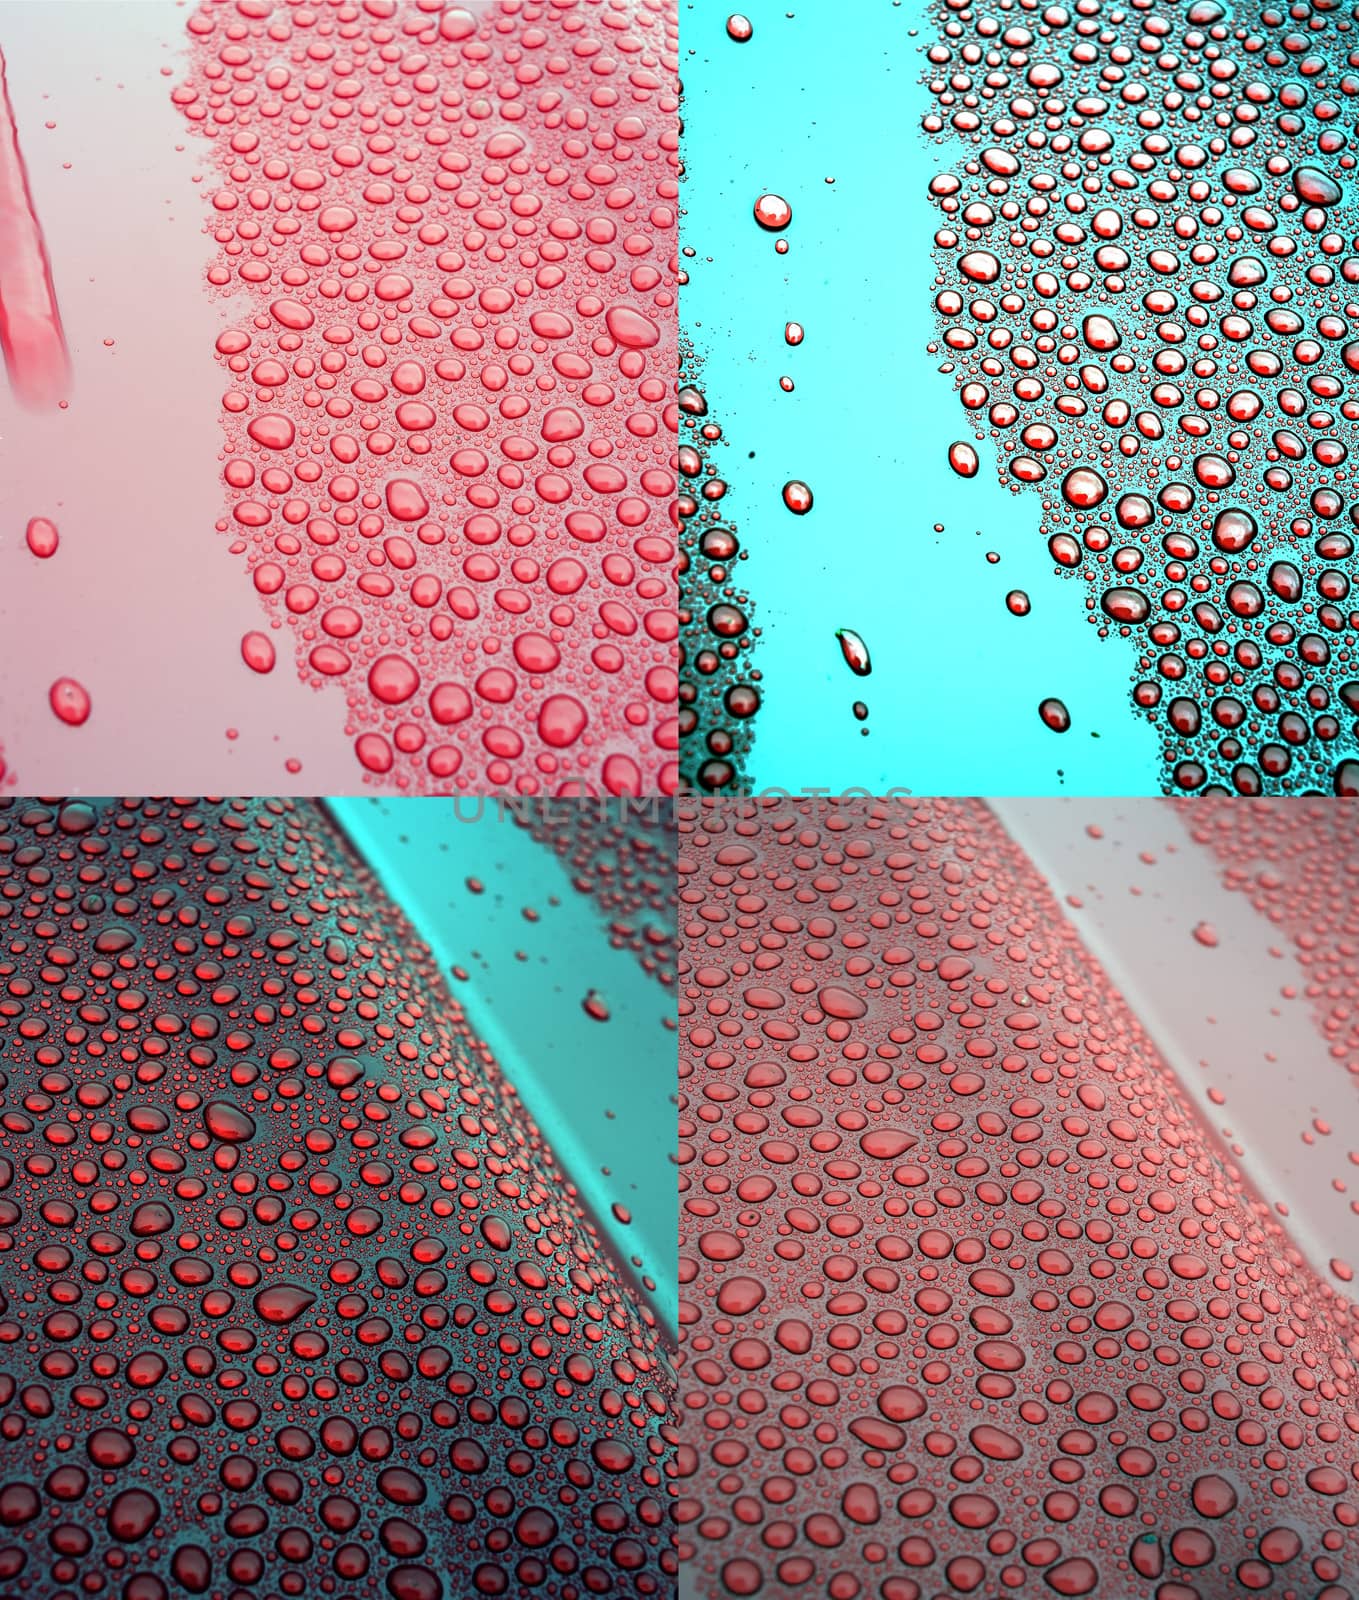 Four variants of a background in the form of water droplets on the surface of red and blue colors